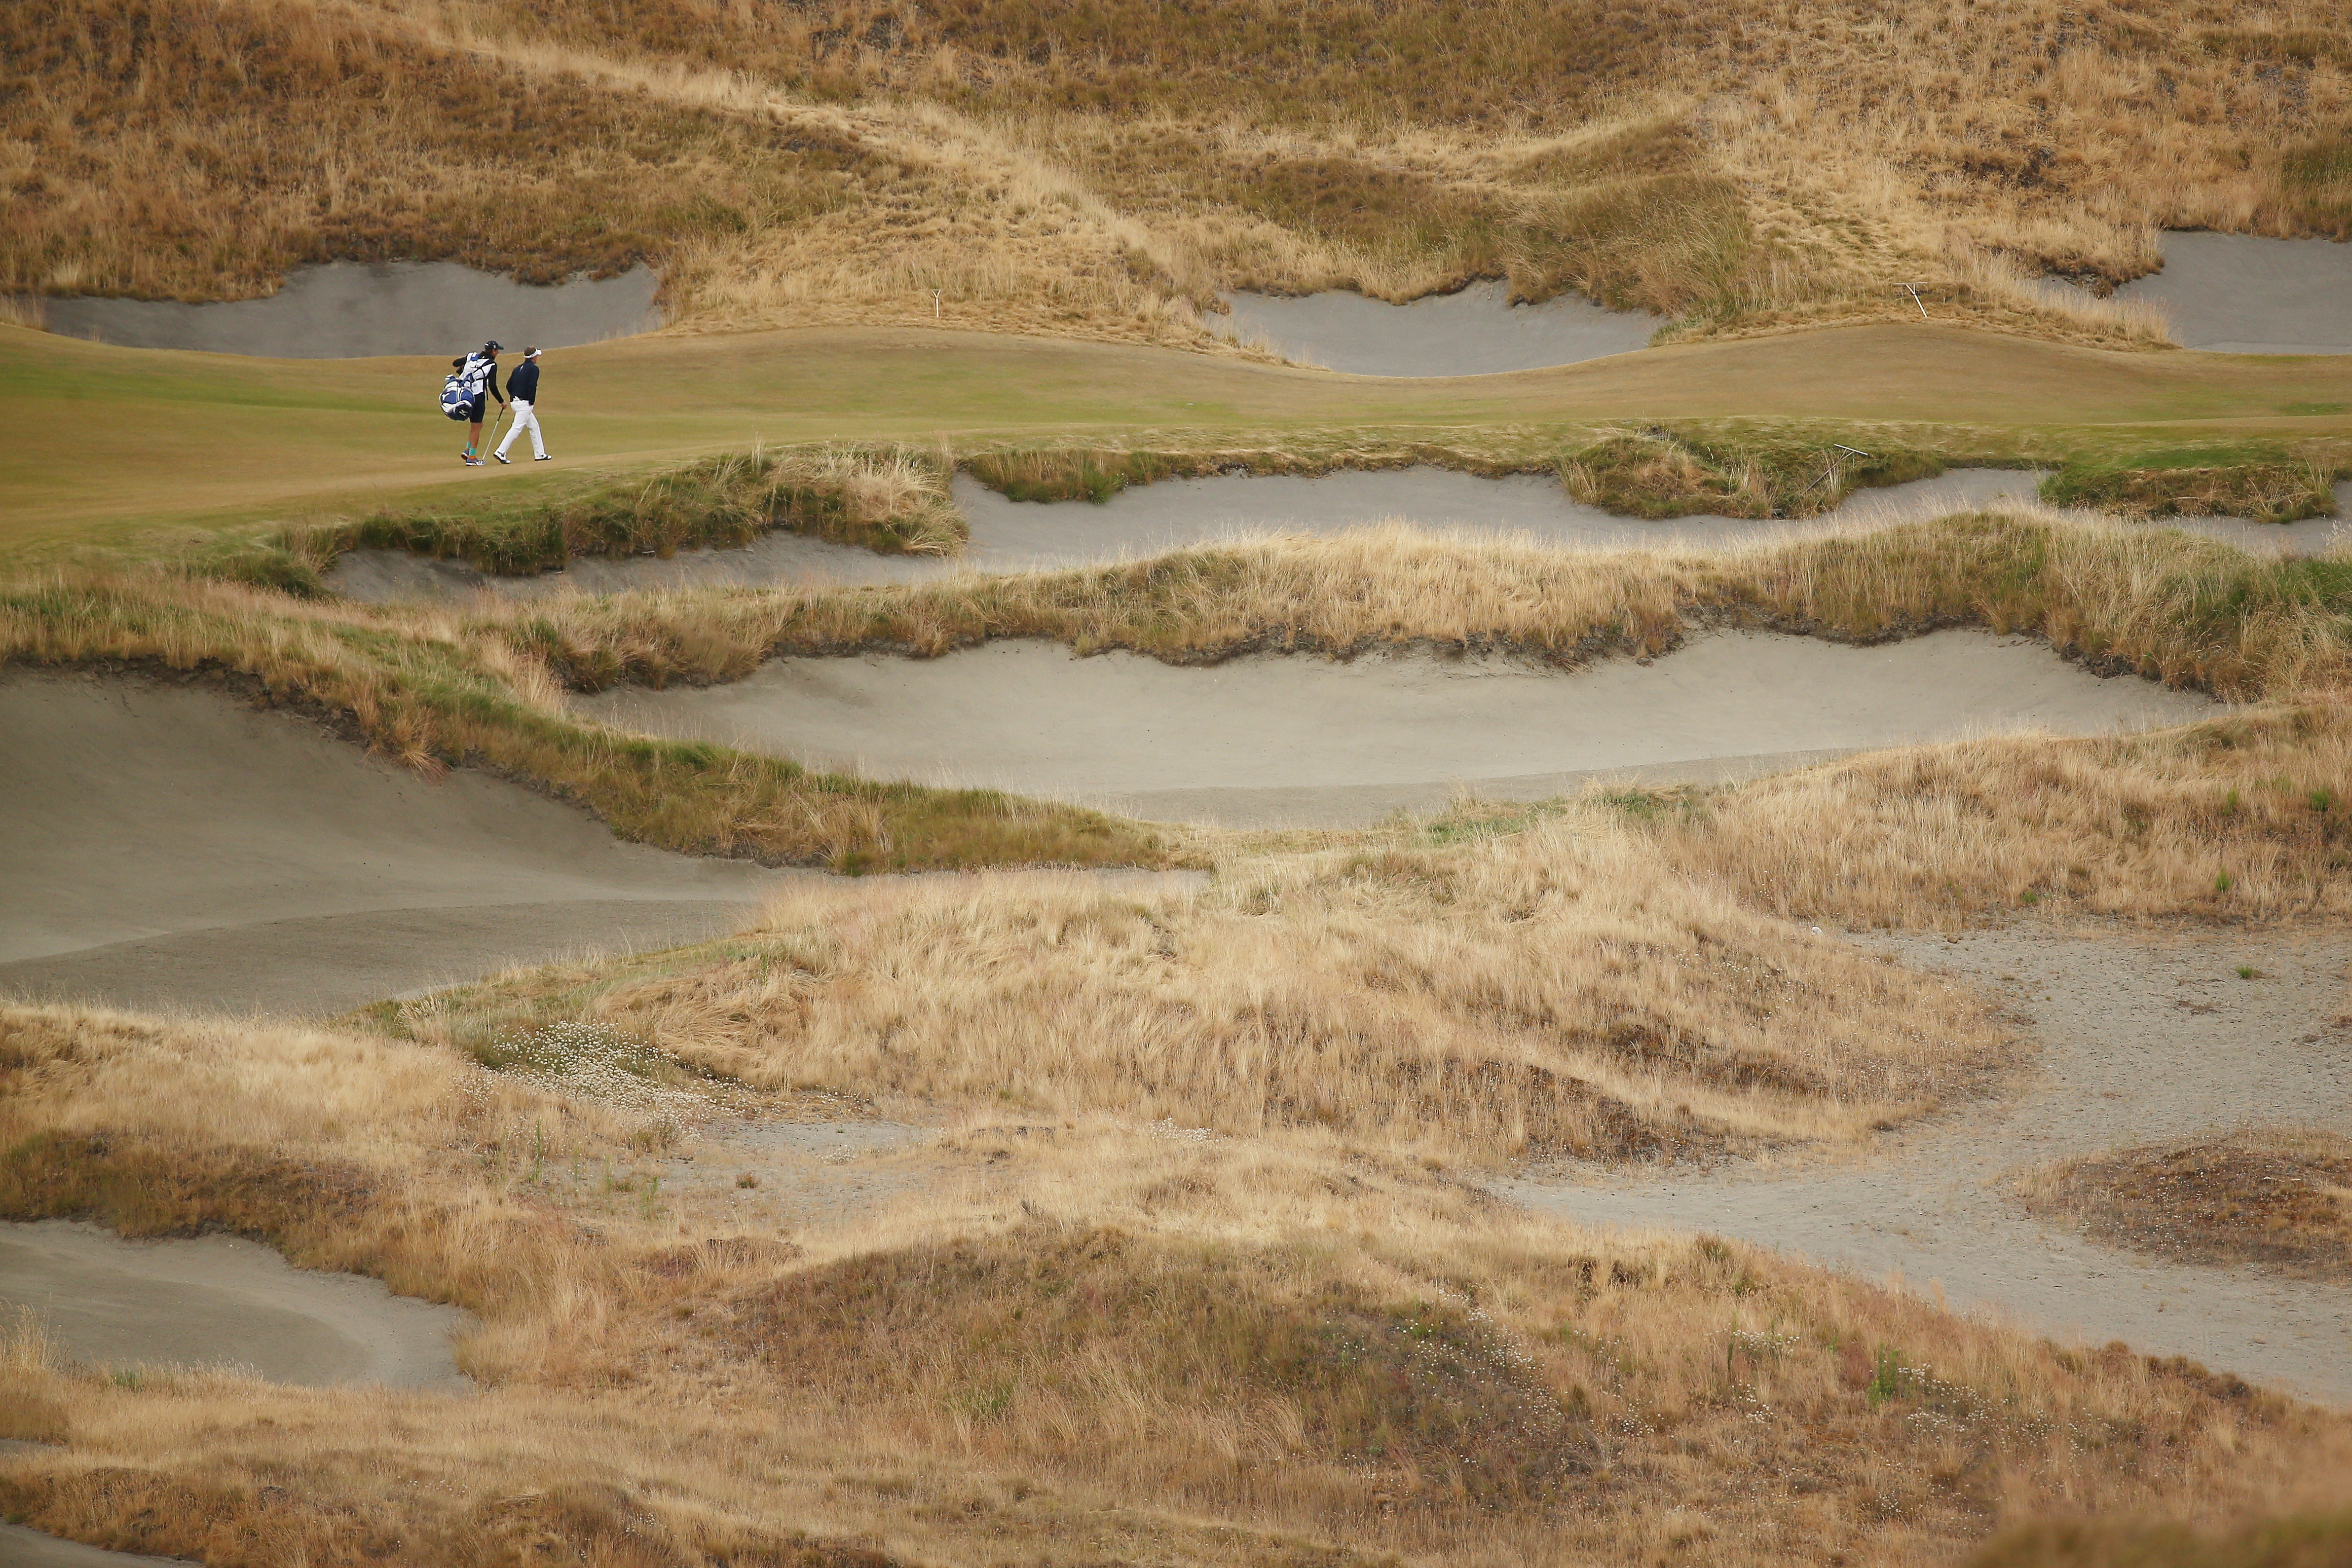 McLaren said the pair ran out of energy at Chambers Bay (Photo: Getty Images)